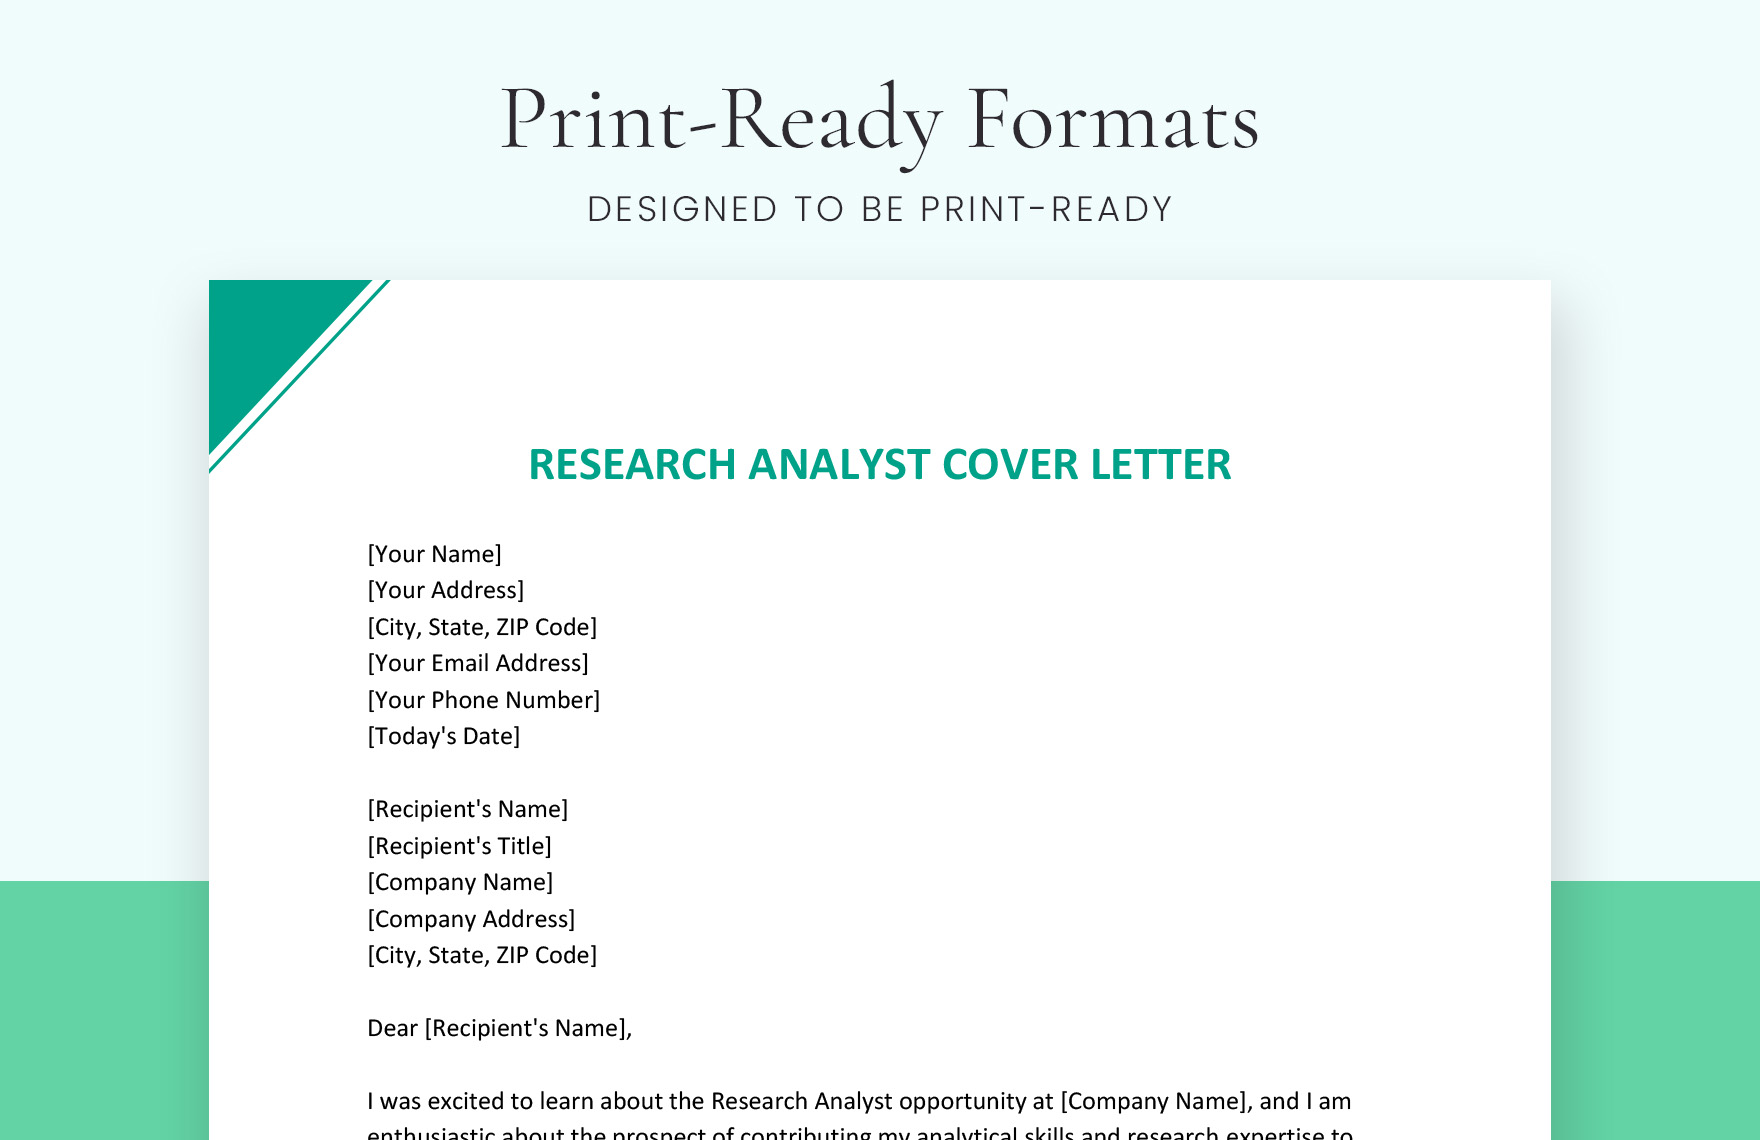 Research Analyst Cover Letter